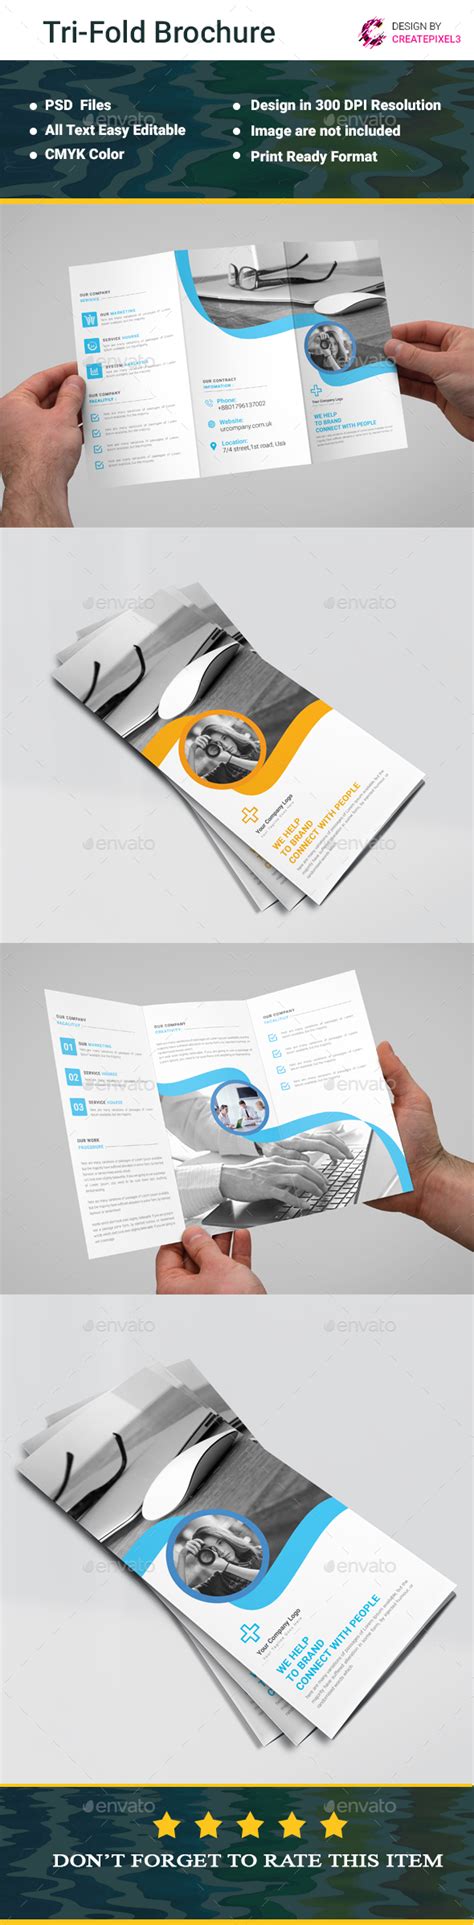 Subscribe to envato elements for unlimited graphic templates downloads for a single monthly fee. Tri Fold Brochure Template PSD | Trifold brochure, Brochure psd, Brochure